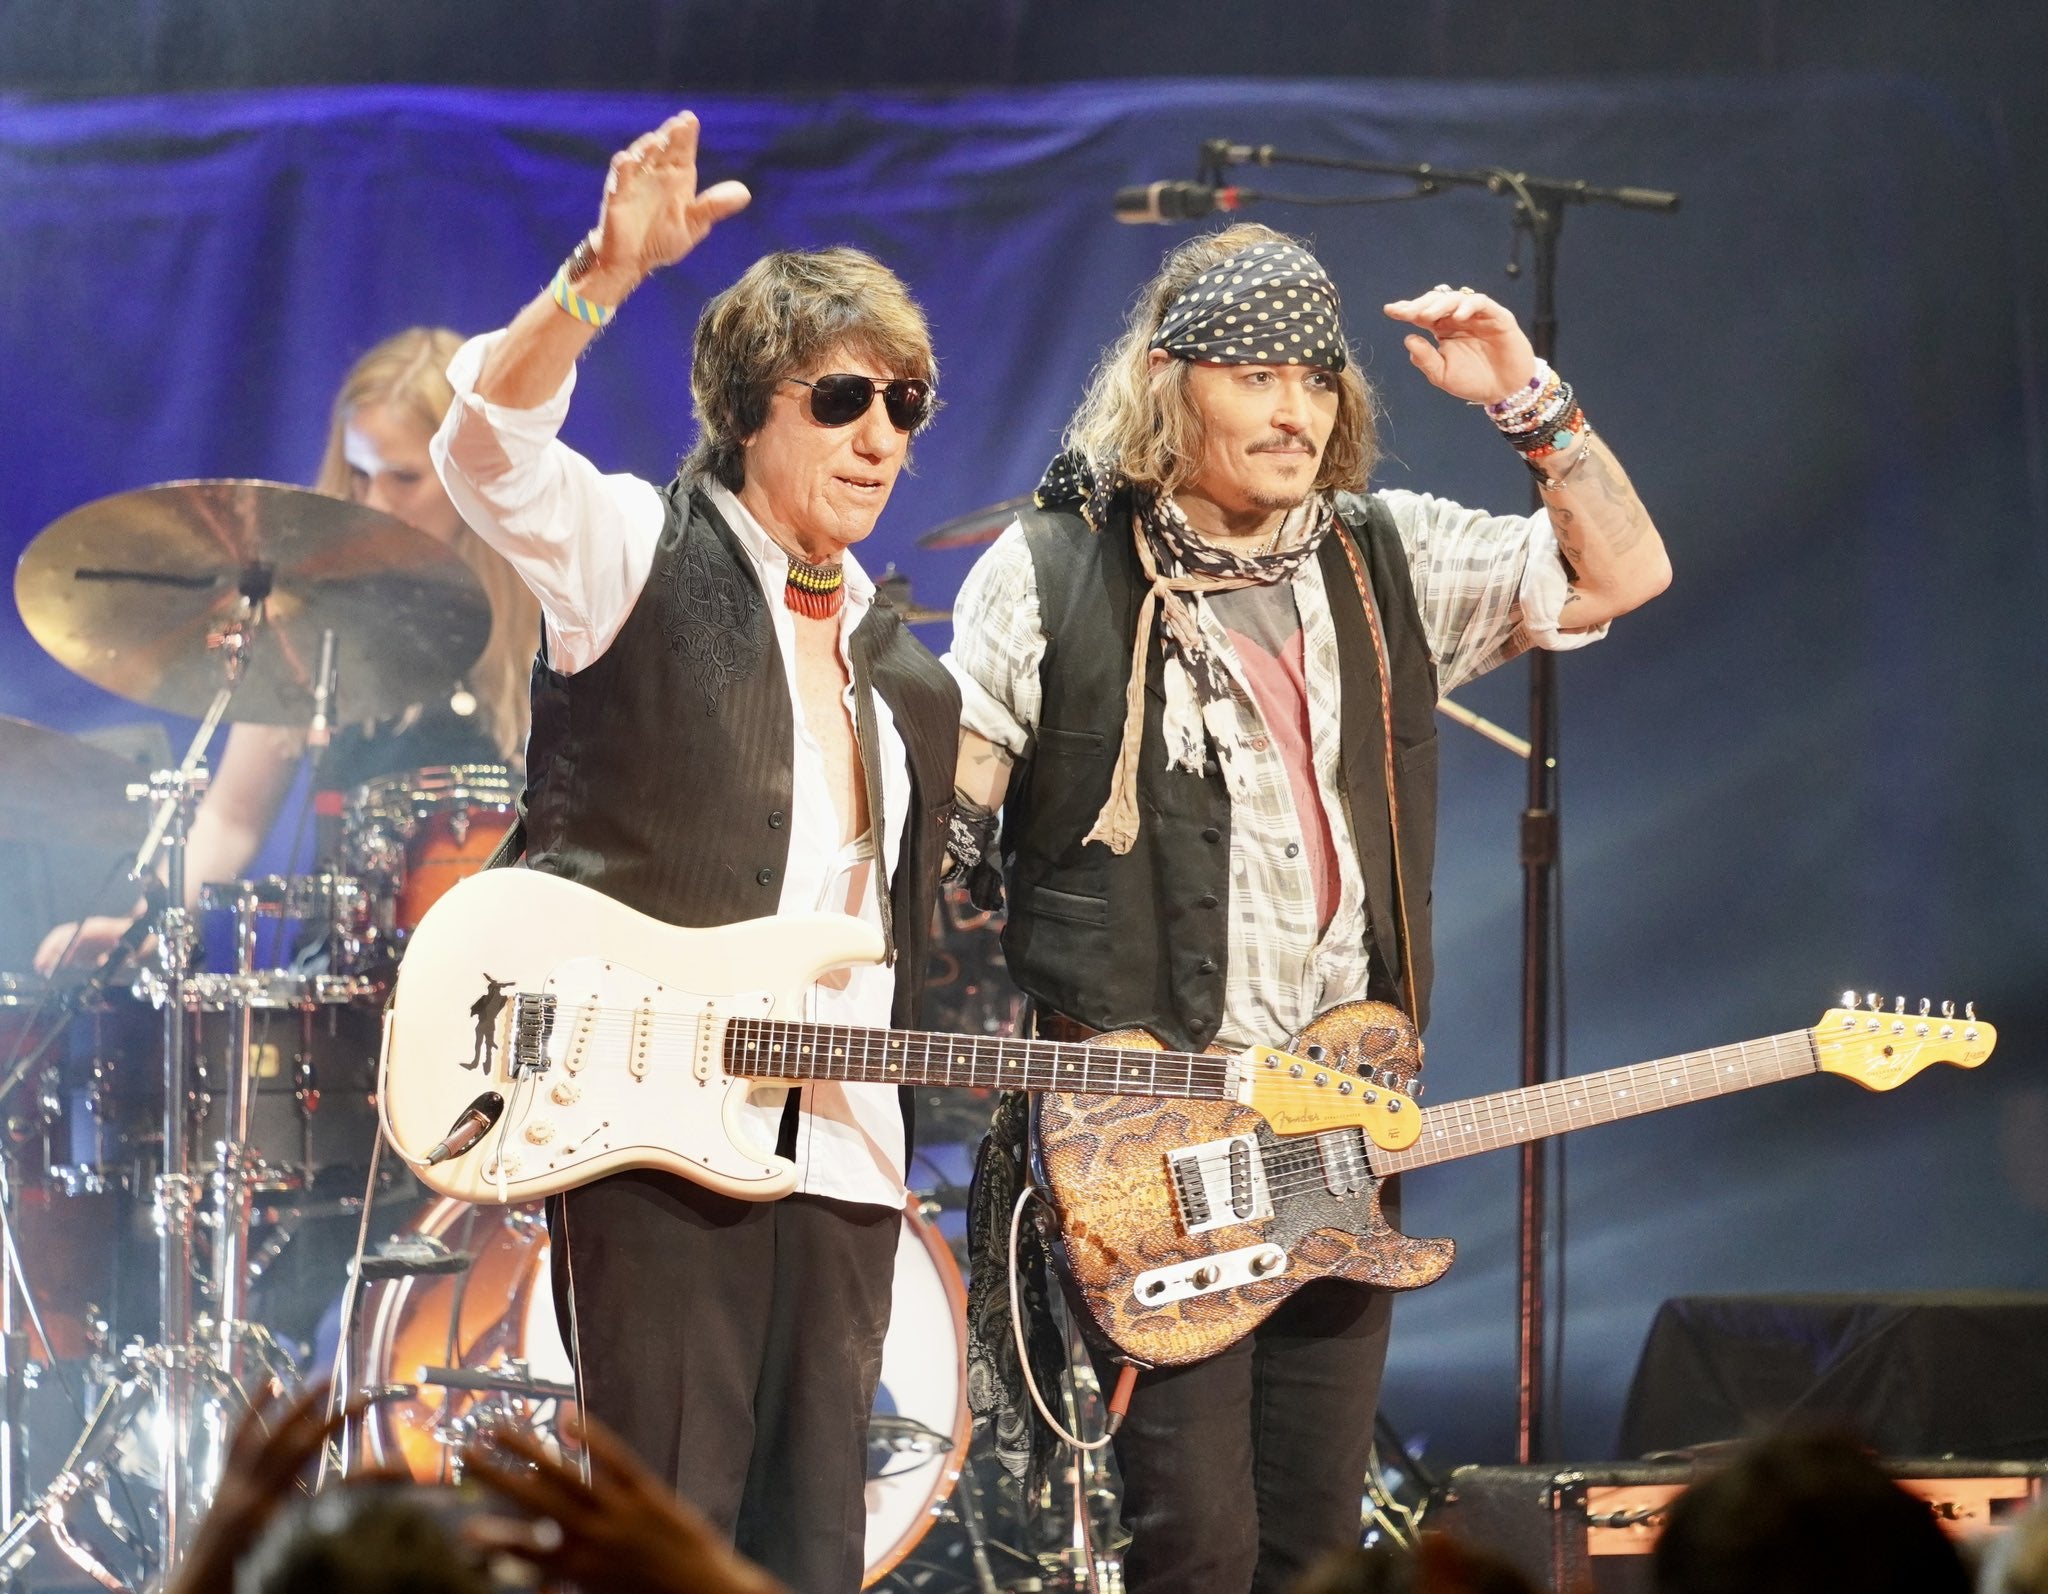 Johnny Depp announced as surprise performer with Jeff Beck at festival